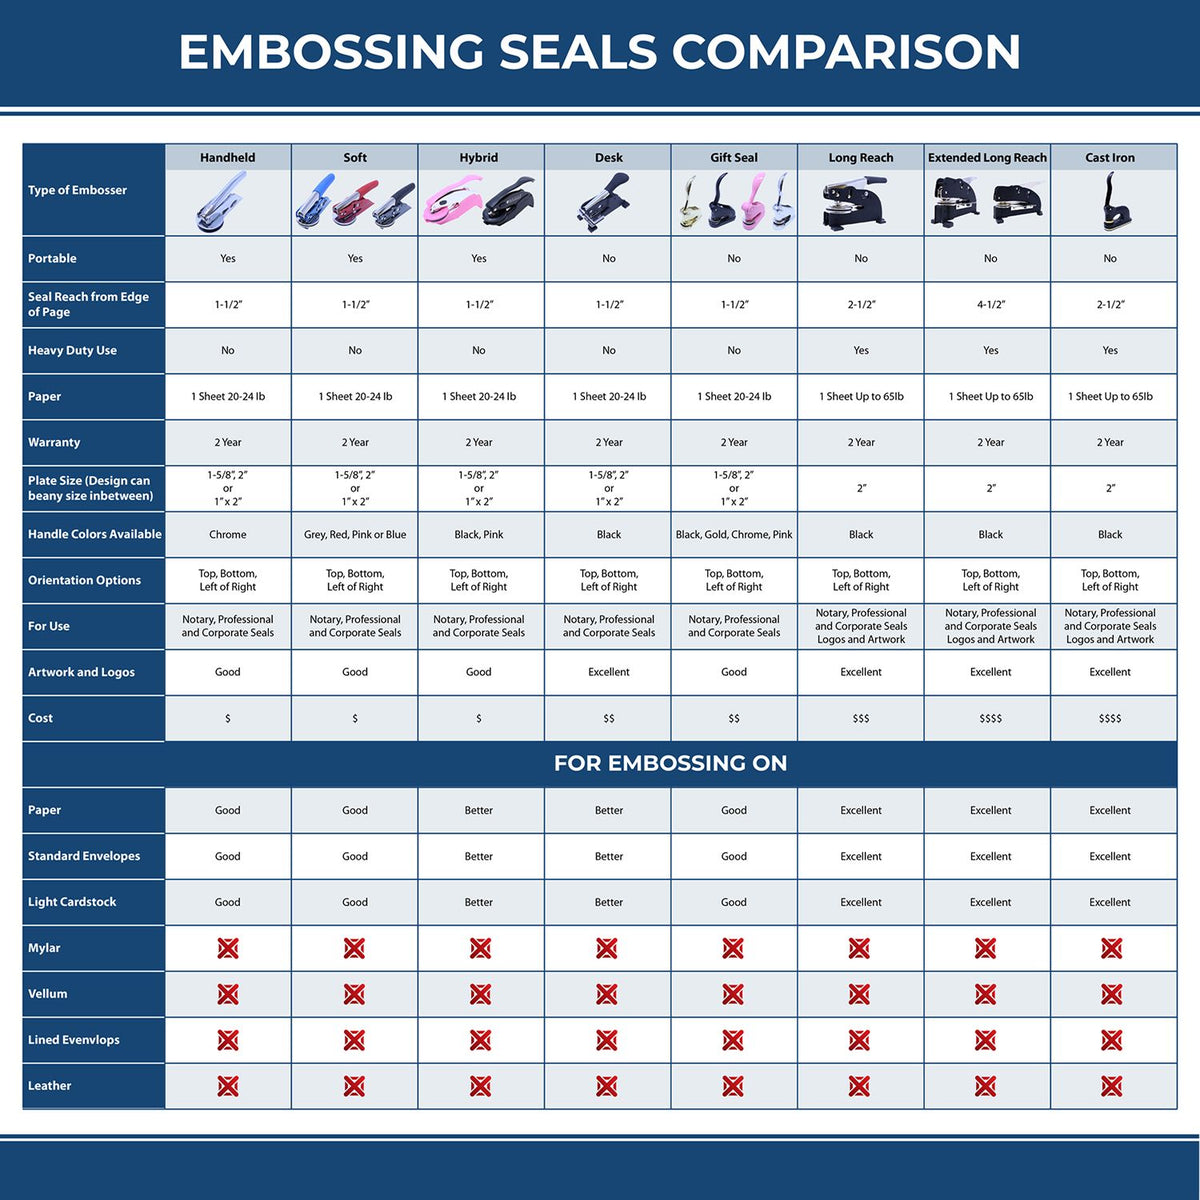 A comparison chart for the different types of mount models available for the Soft Pocket New Jersey Landscape Architect Embosser.